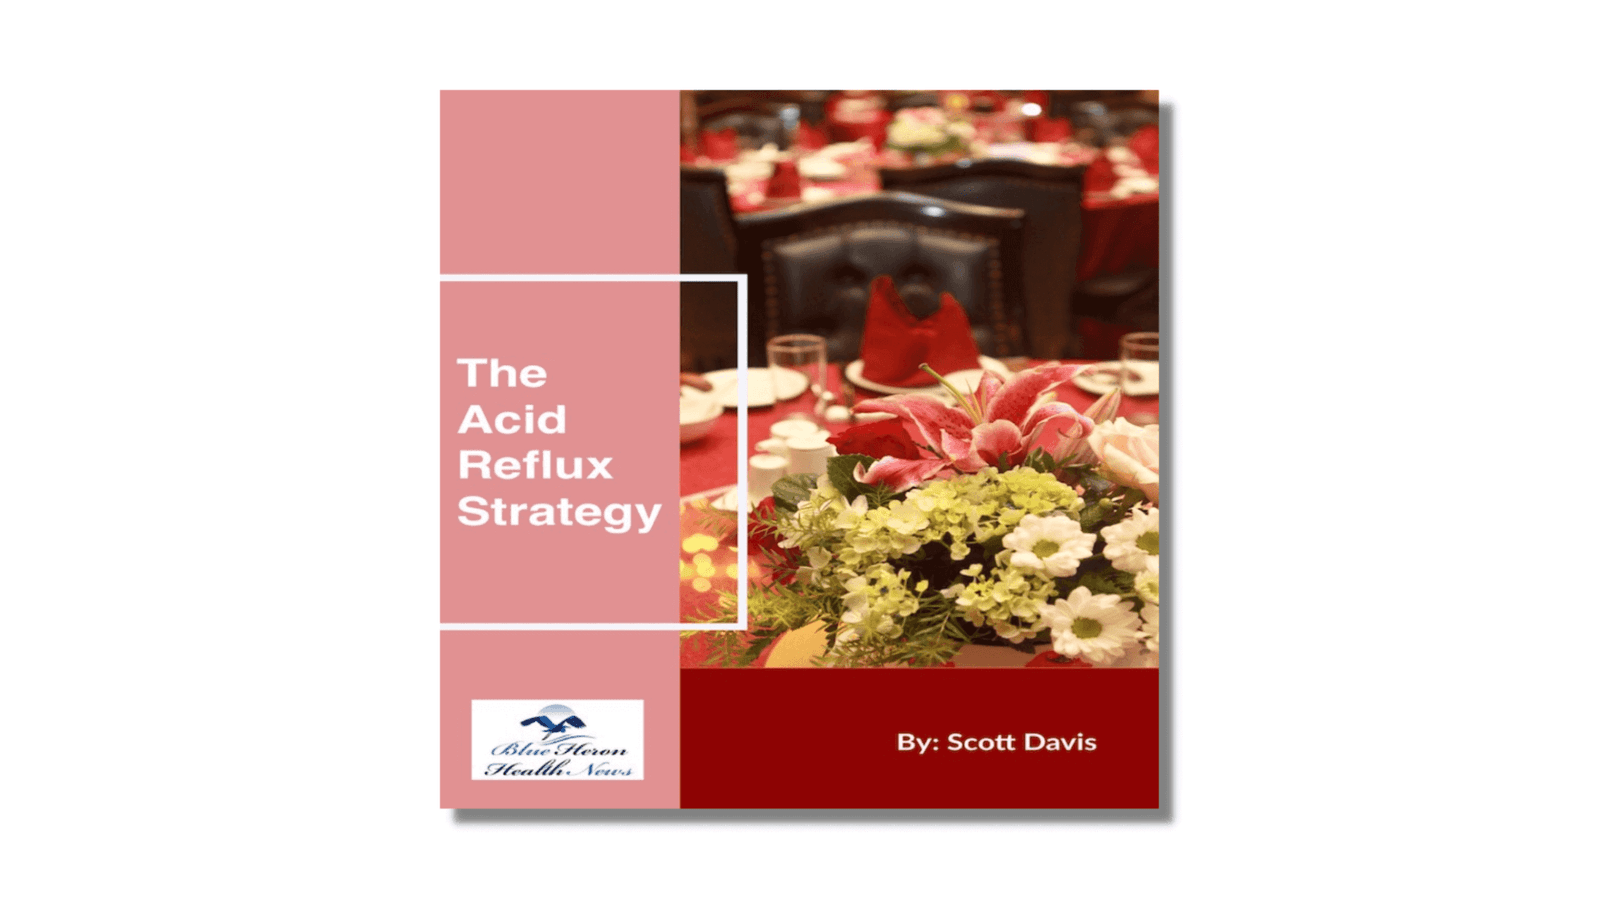 The Acid Reflux Strategy